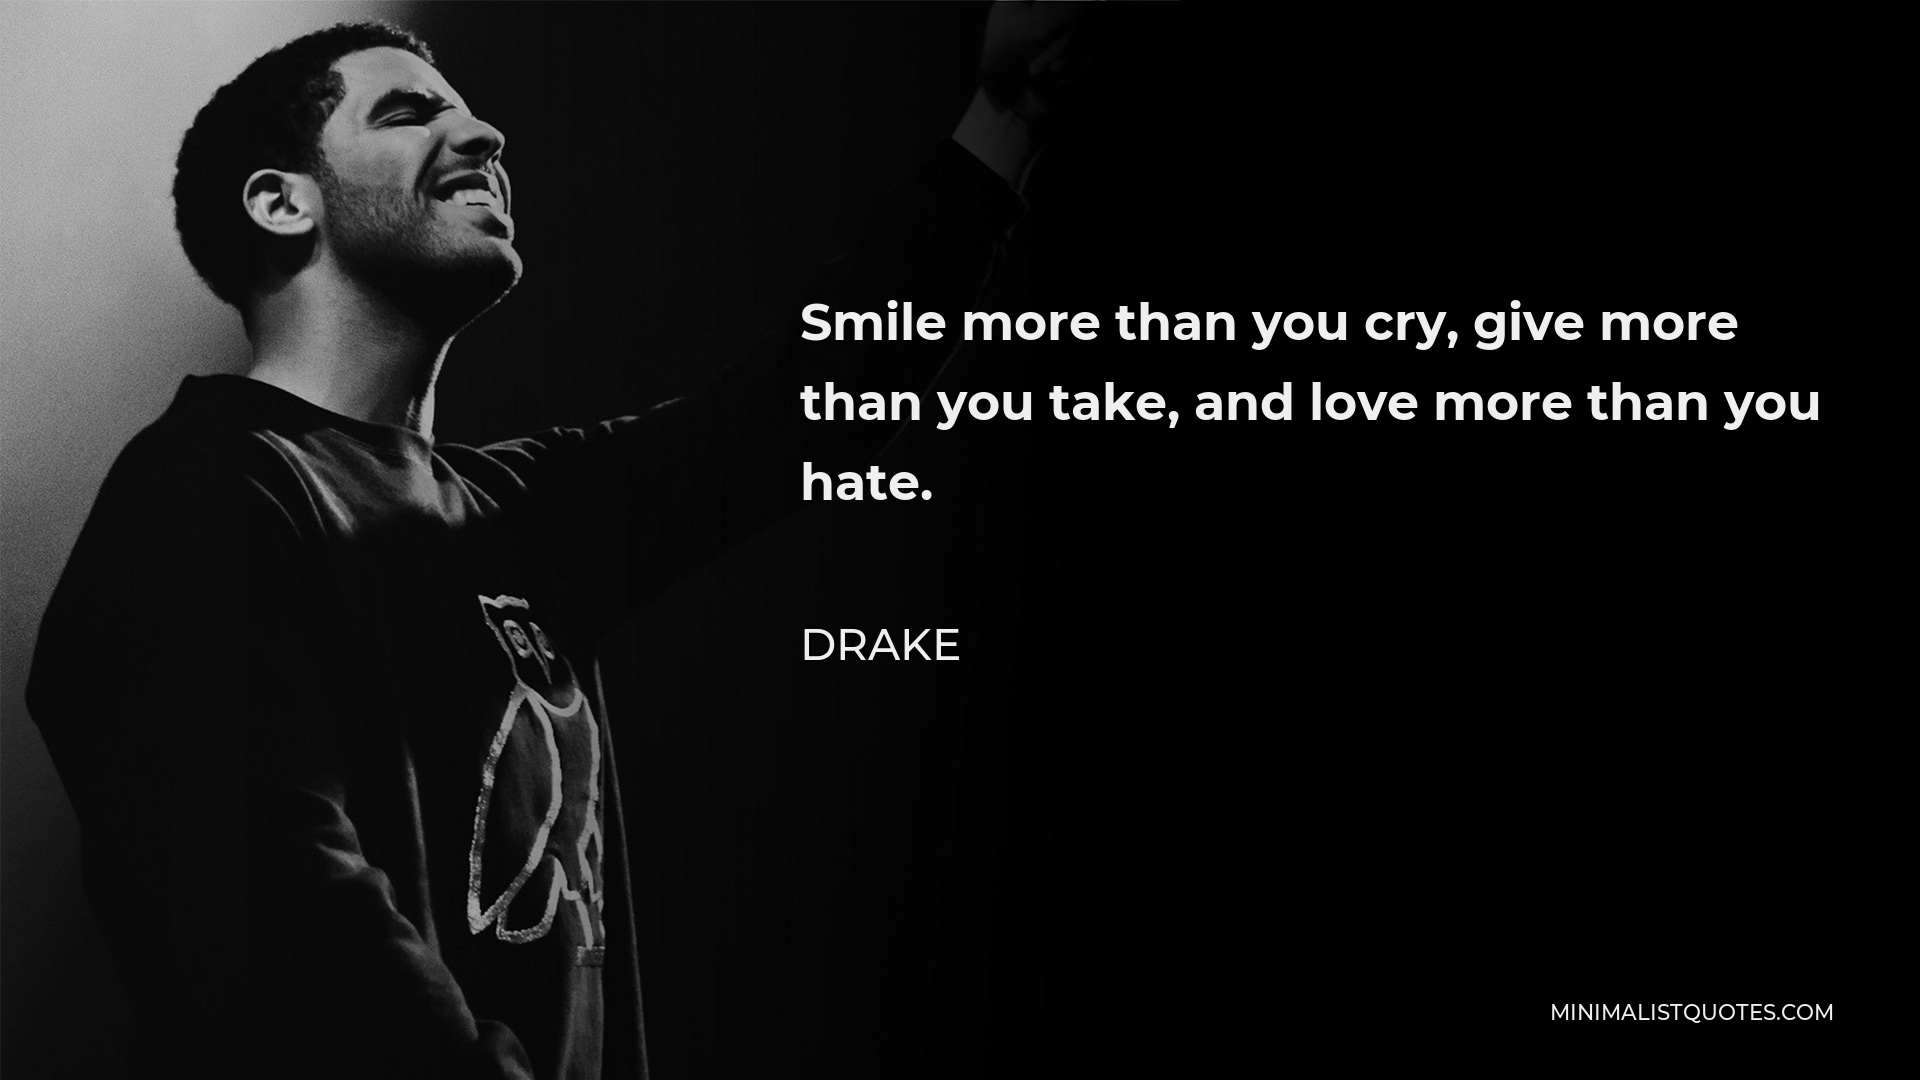 Drake Quote - Smile more than you cry, give more than you take, and love more than you hate.